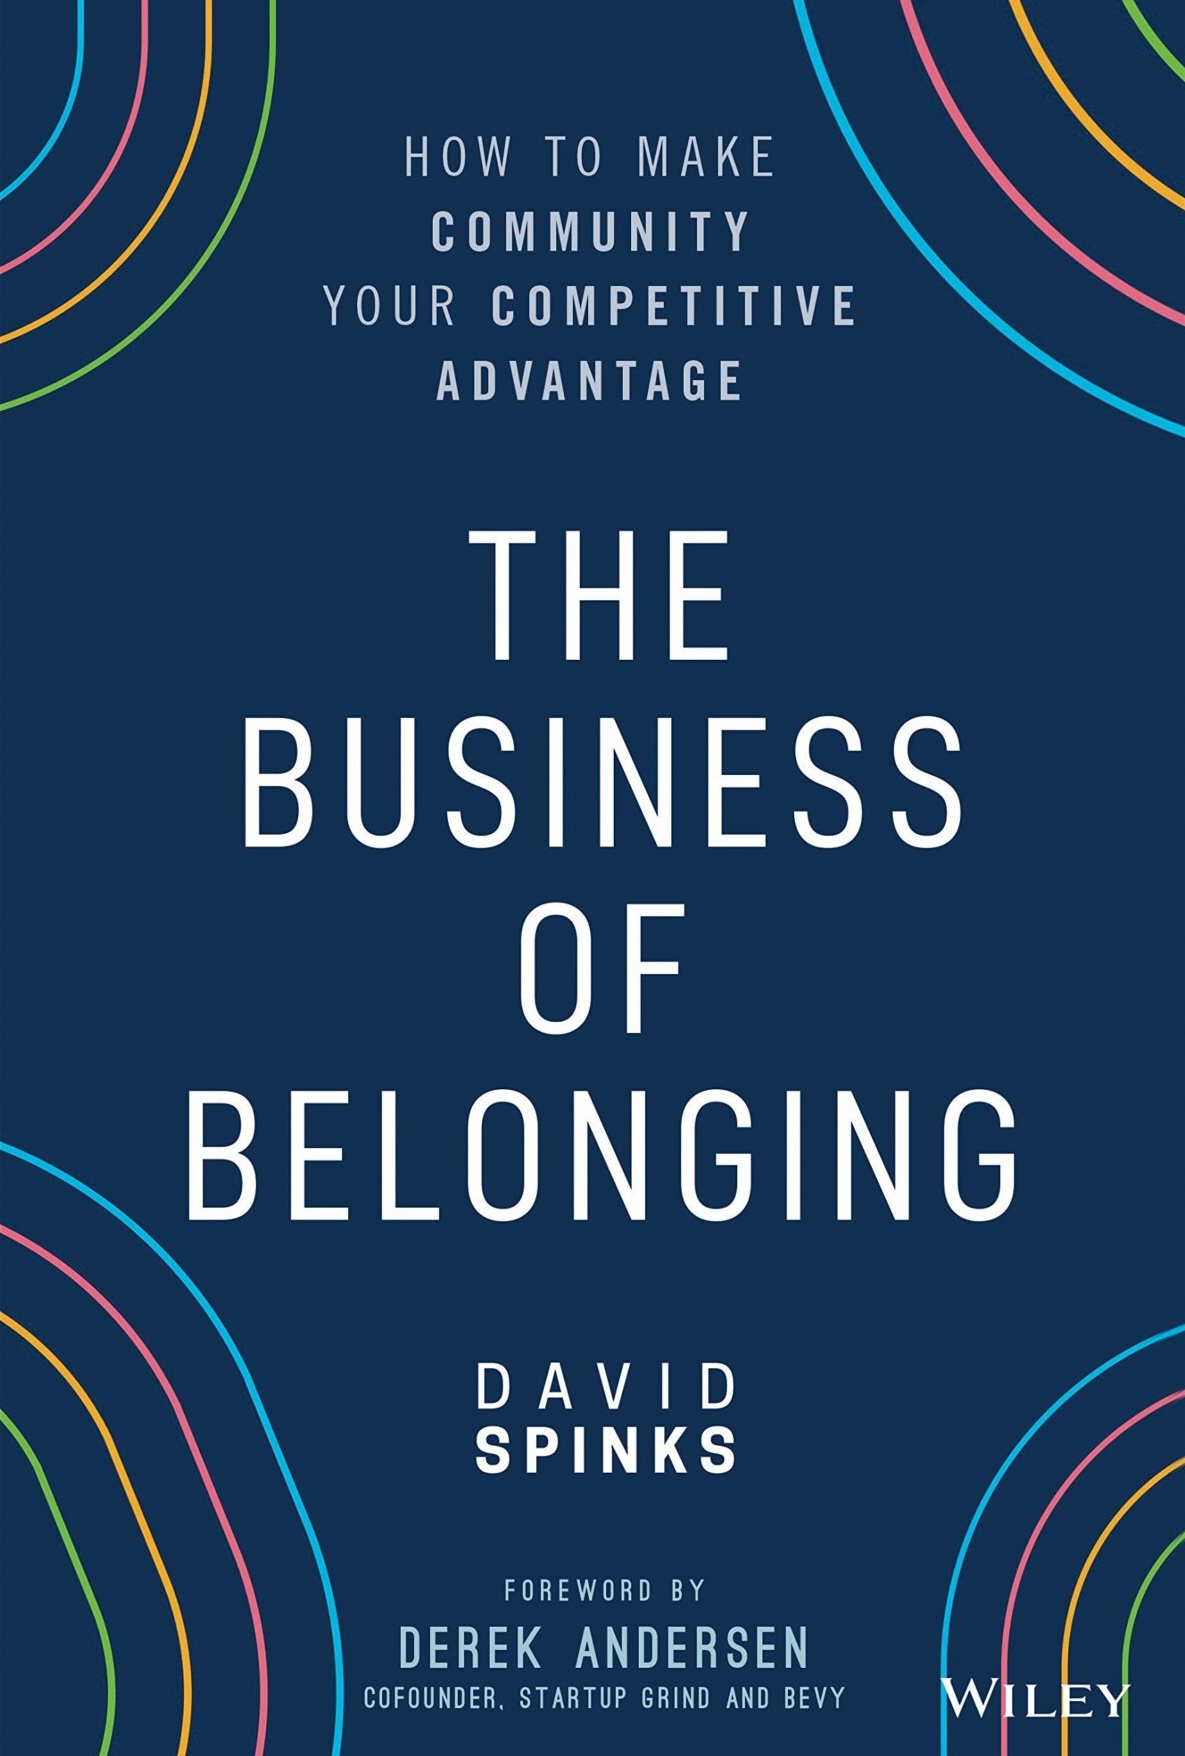 The Business of Belonging: How to Make Community your Competitive Advantage by David Spinks